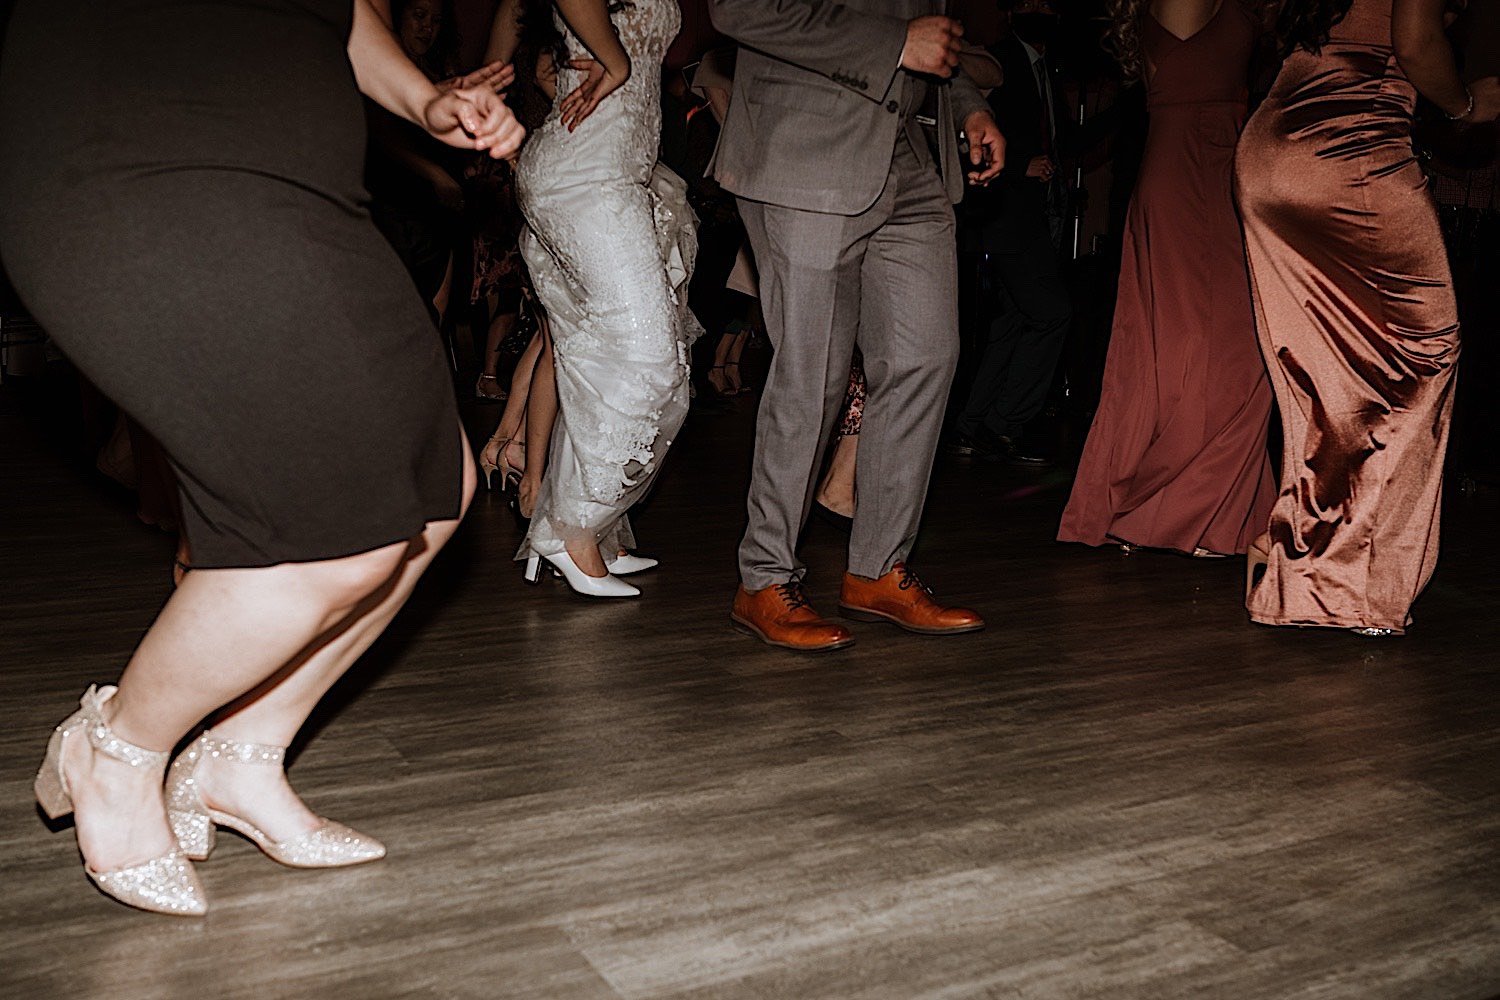 Legs of bride and groom as well as guests dancing during wedding reception